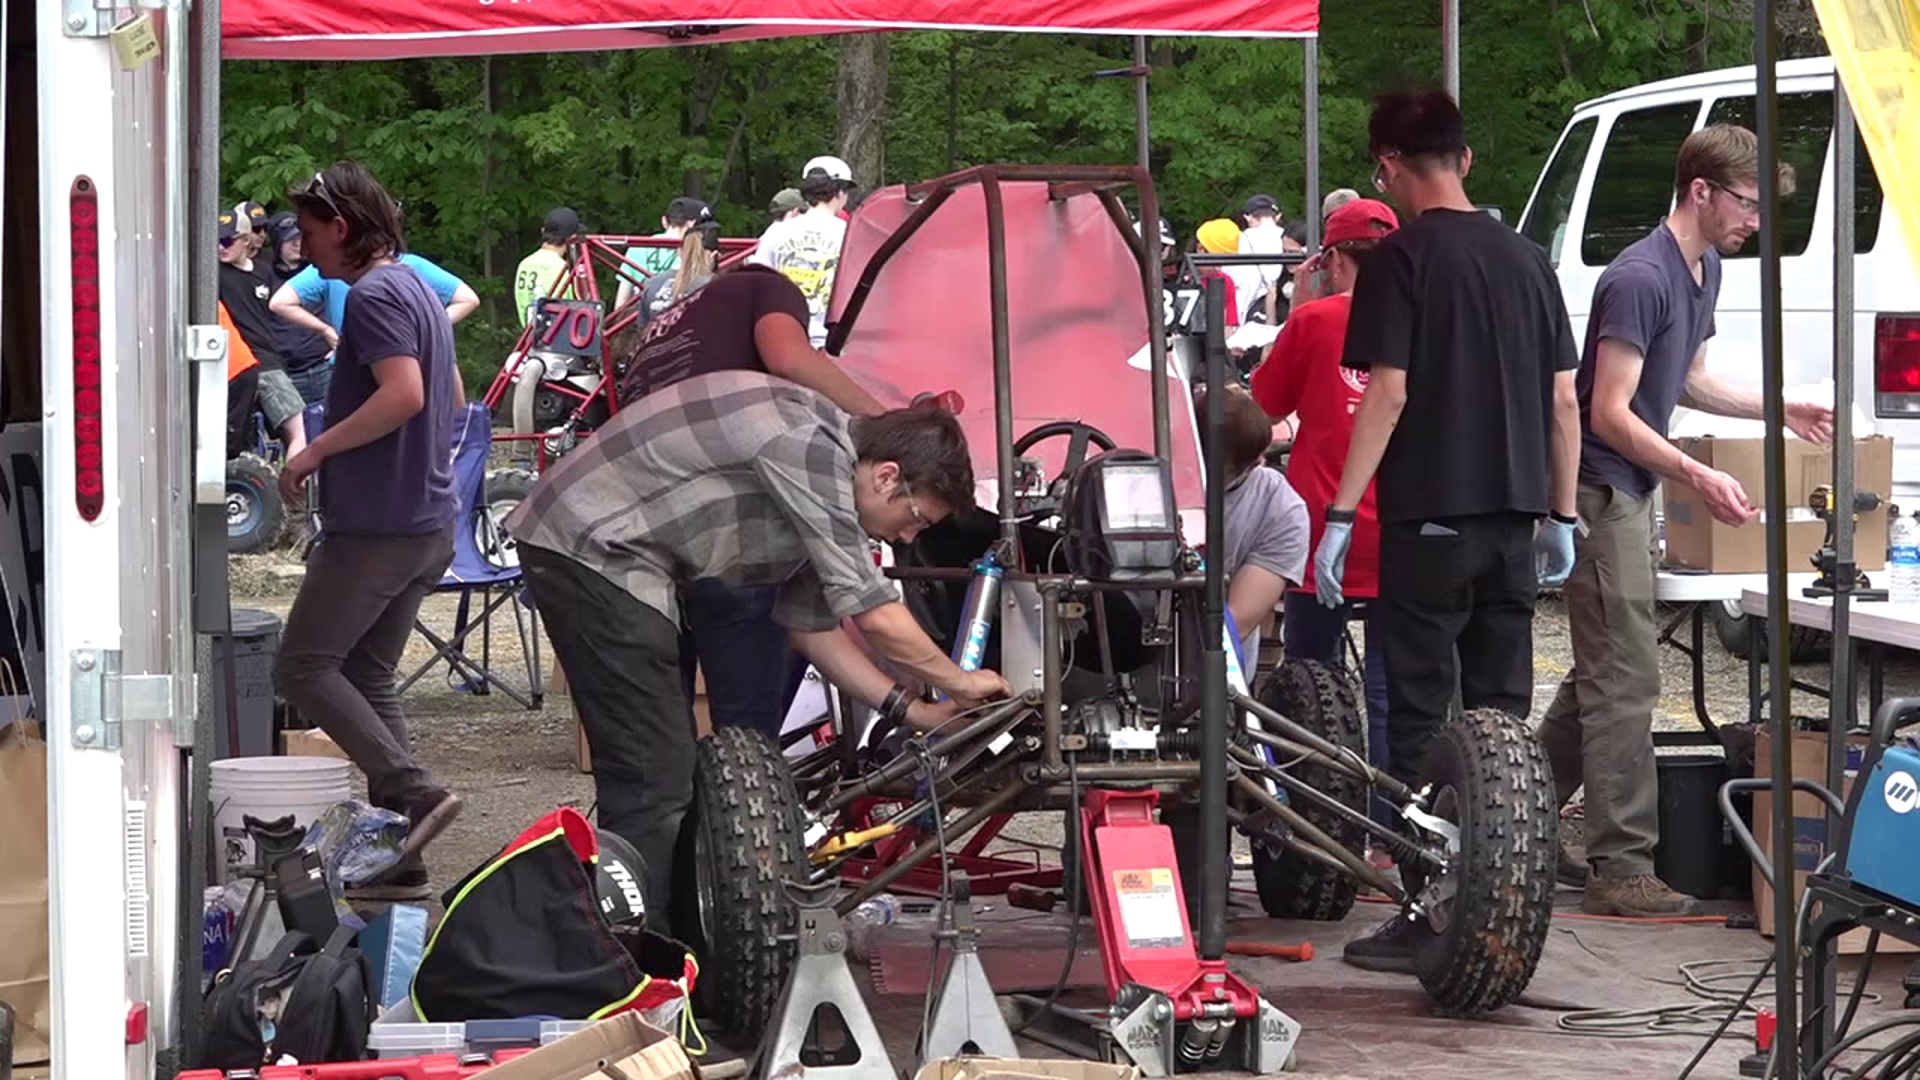 College students from around the world are in central Pennsylvania gearing up for this weekend's Baja SAE car competition.